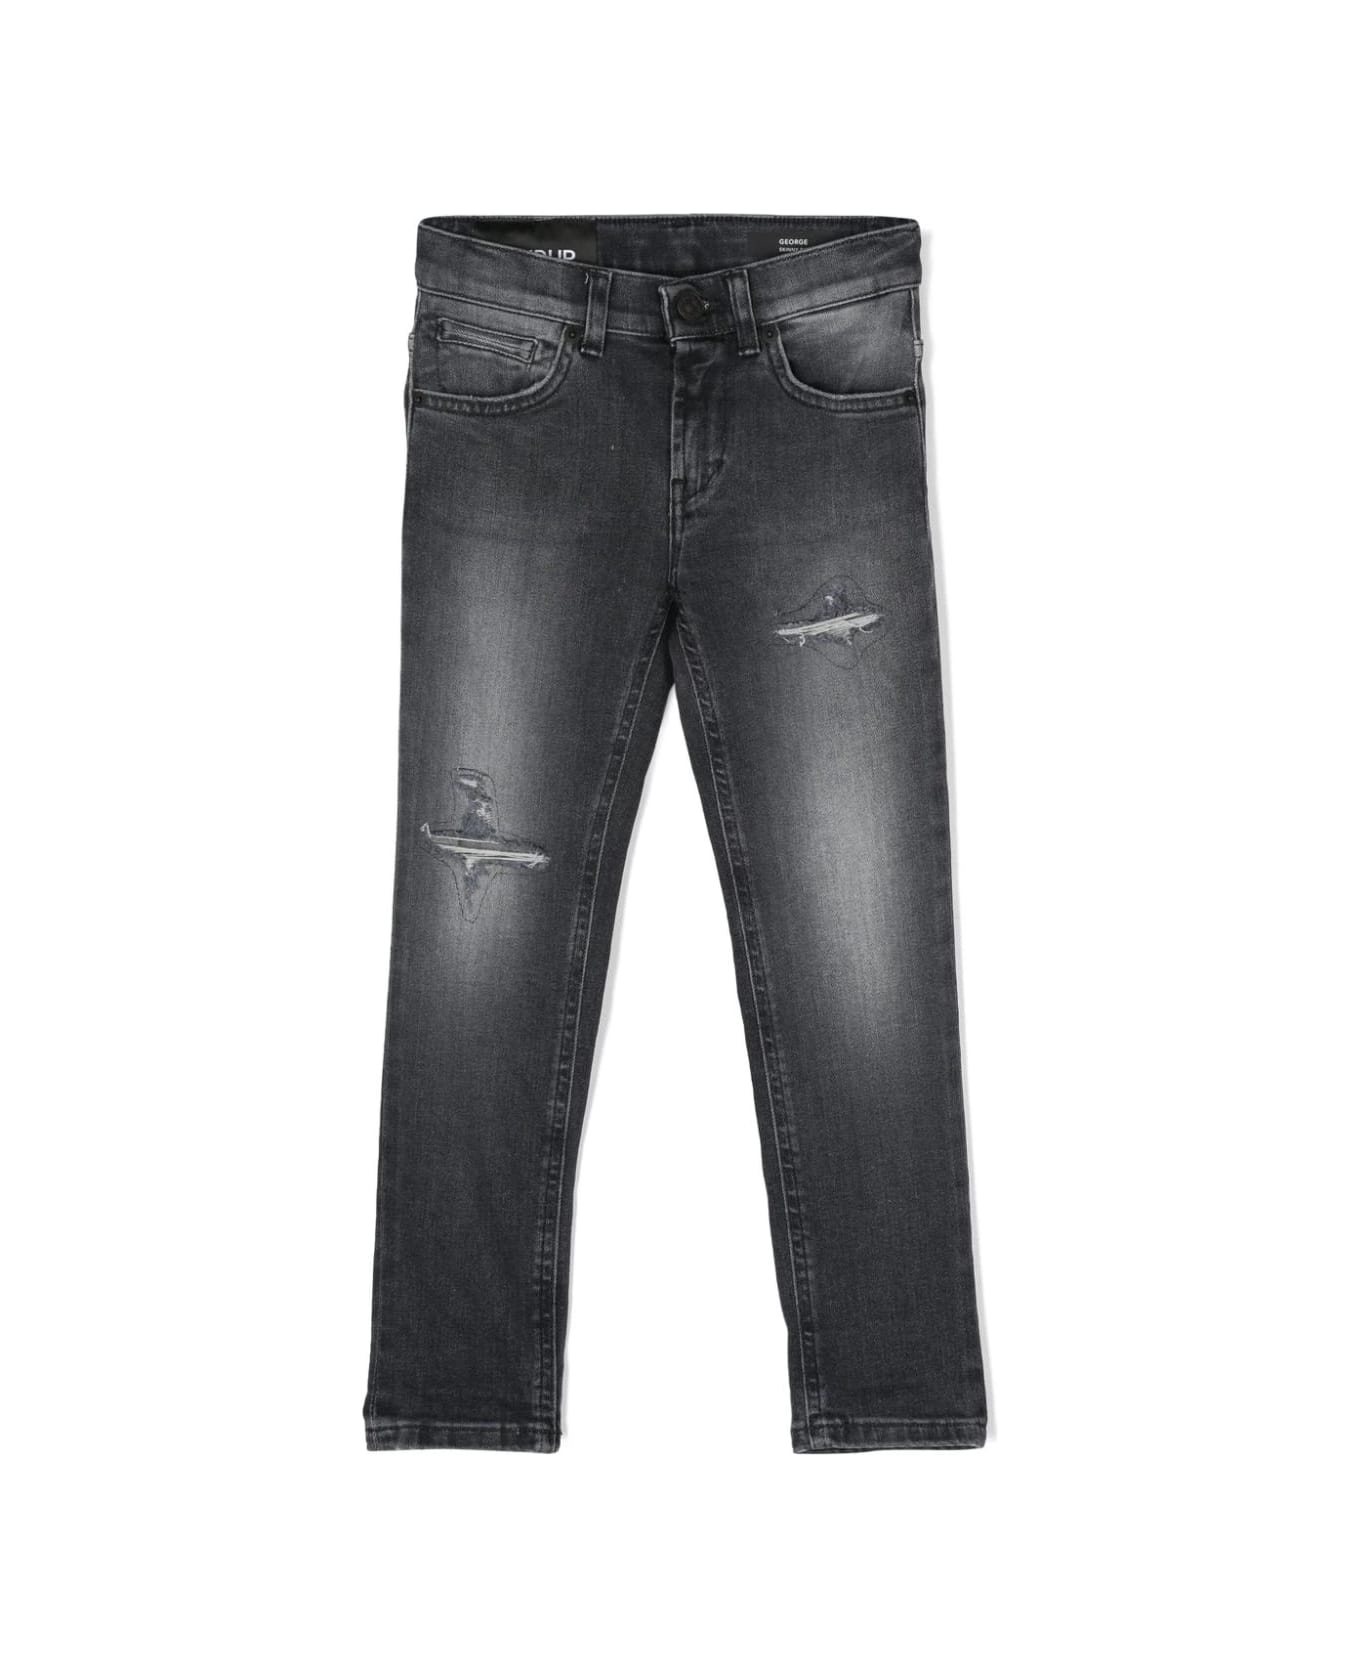 Dondup Black George Jeans With Abrasions - Grey ボトムス